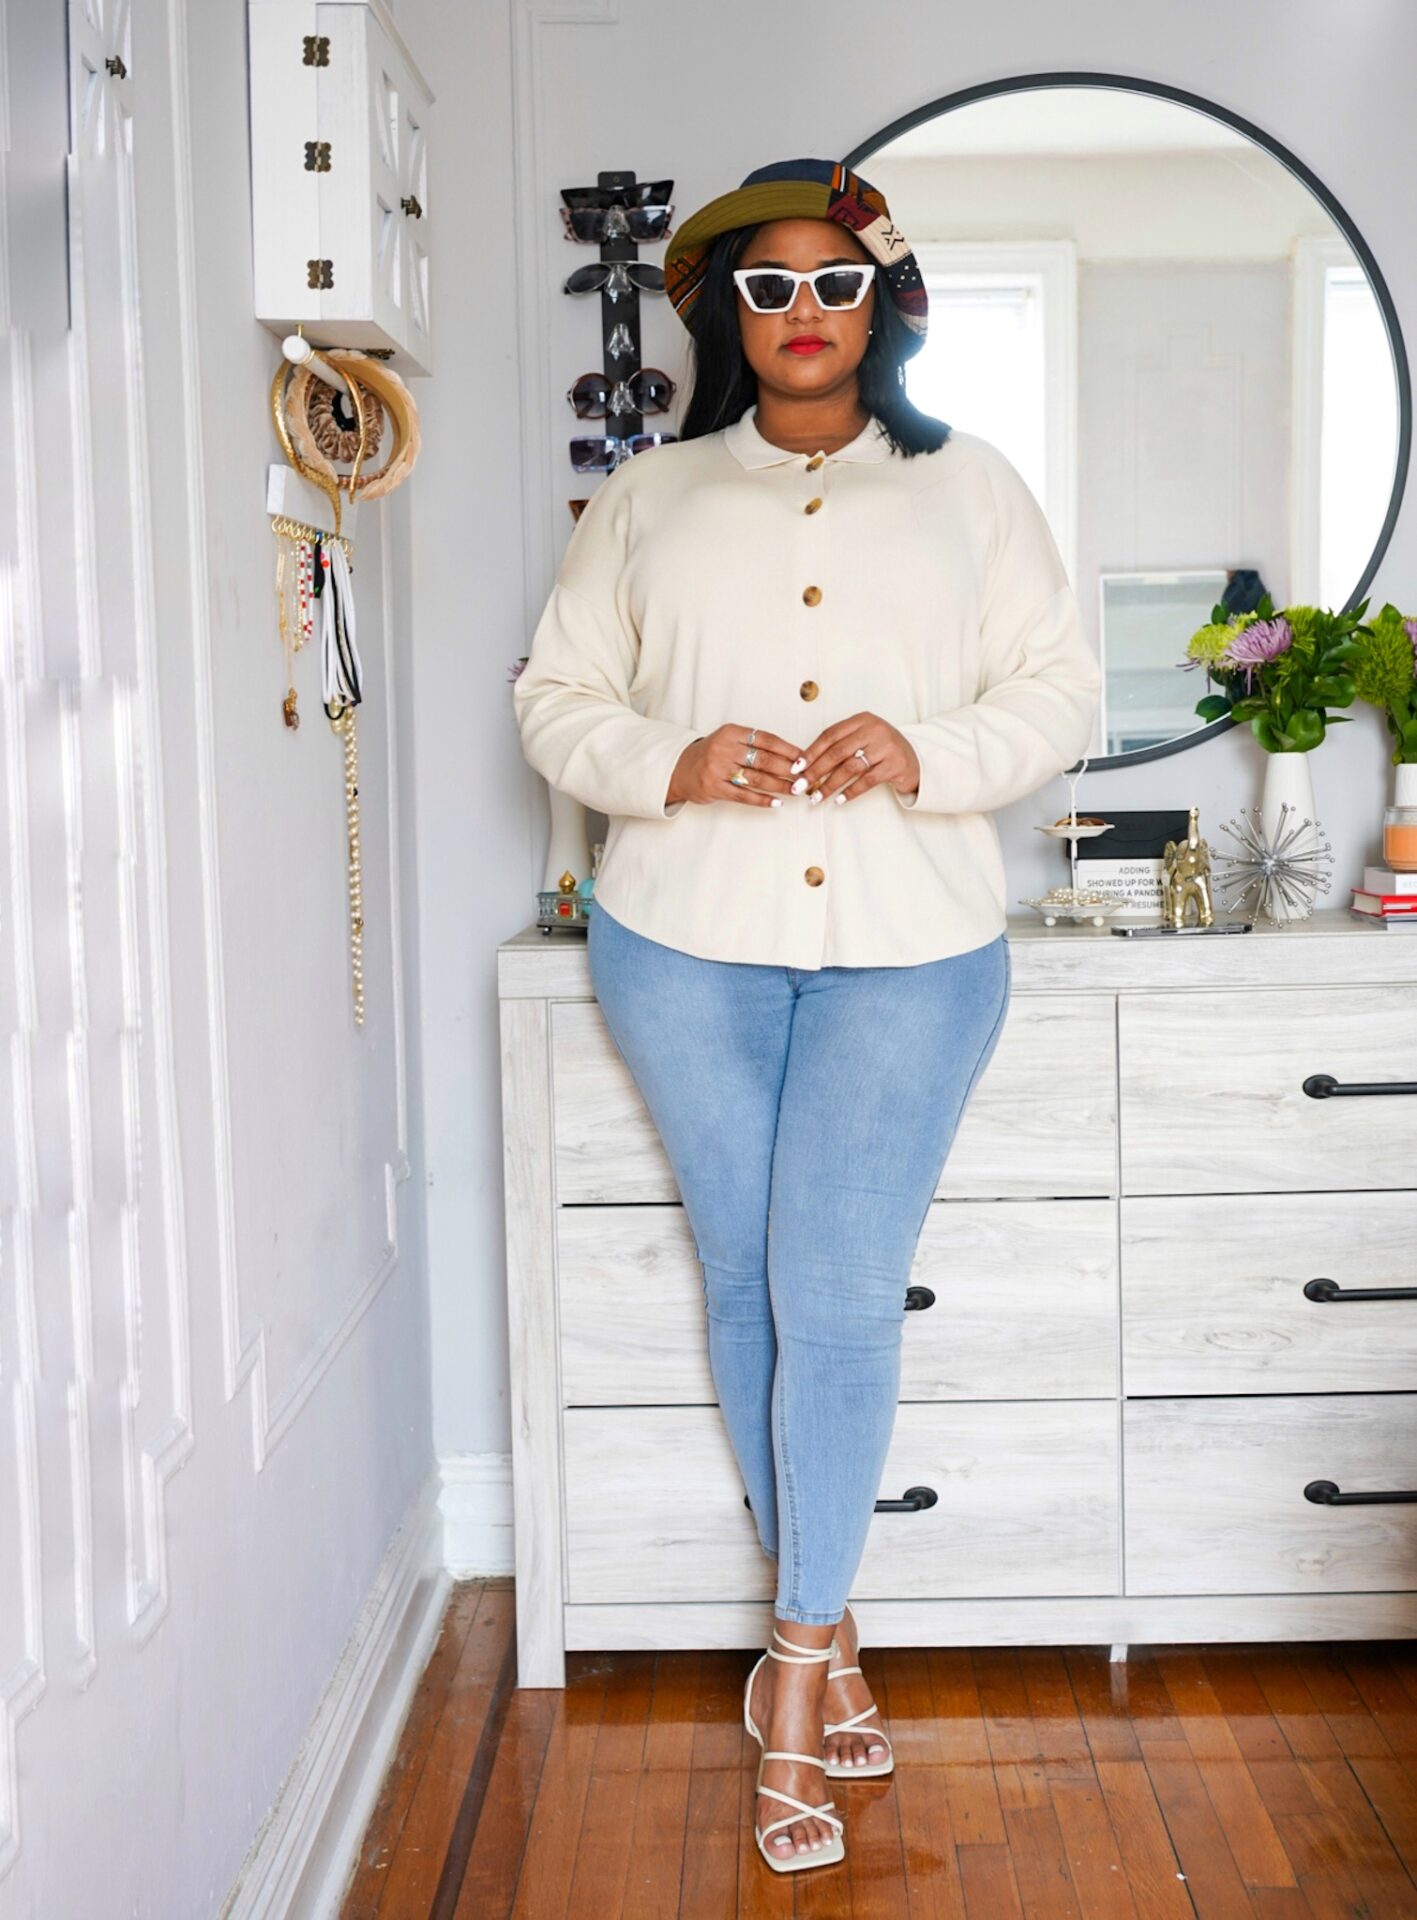 The perfect denim pants for the curvy figure